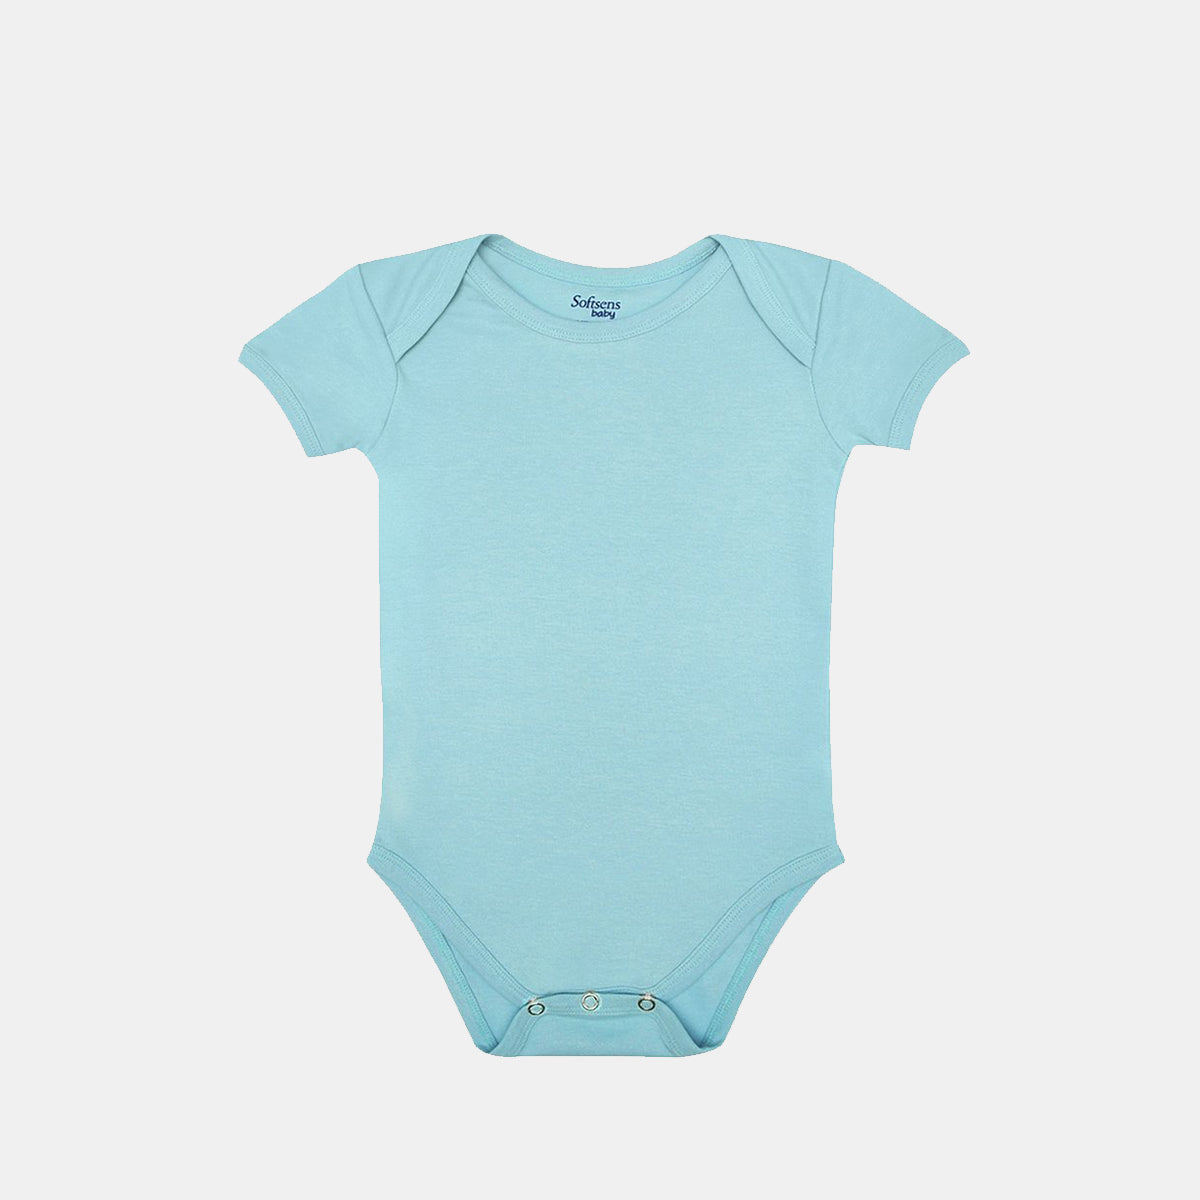 Casual Classic 100% Cotton Light Blue Baby Body Suit